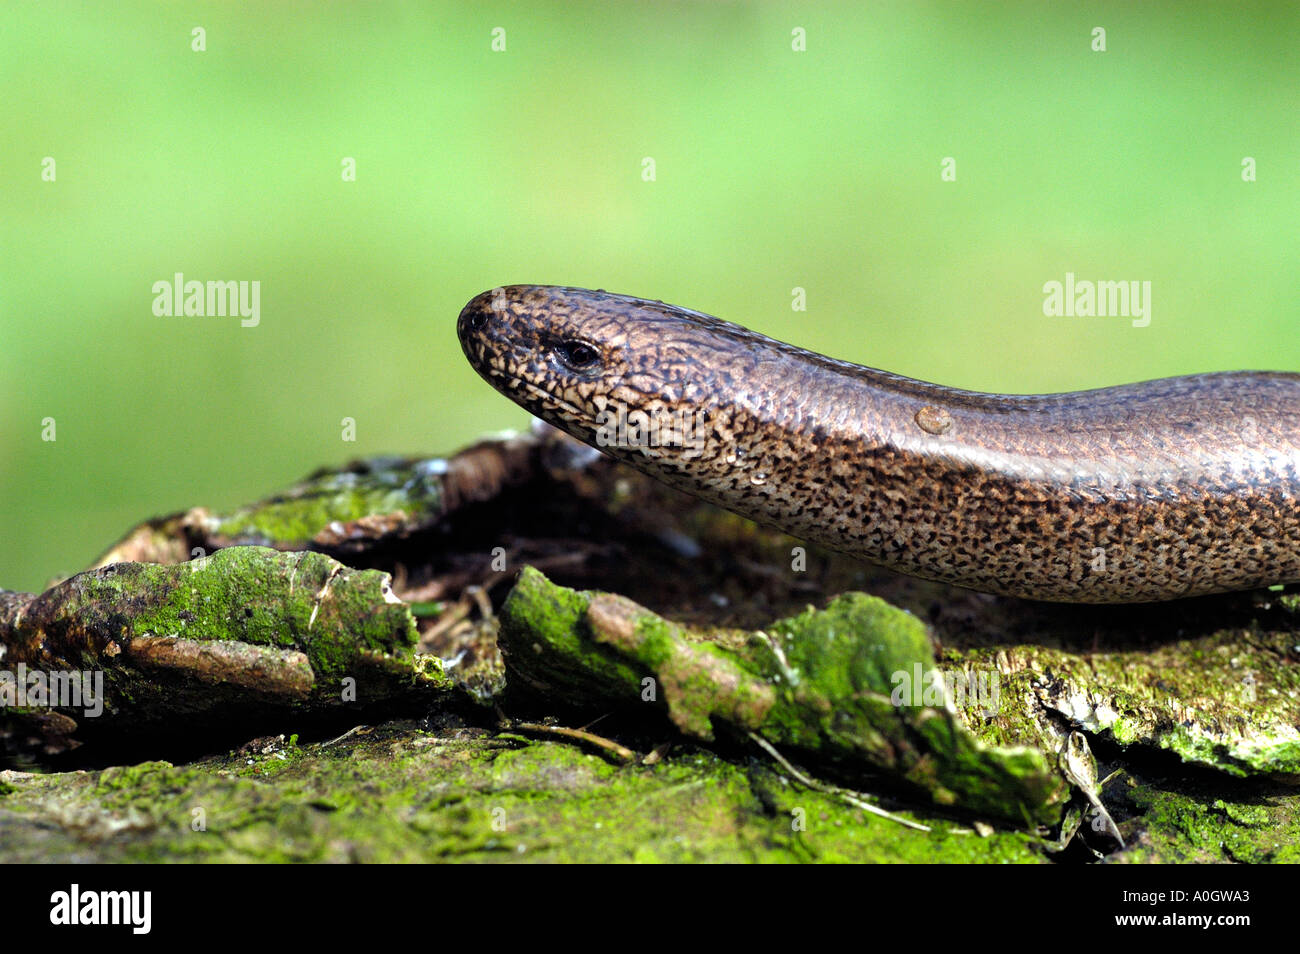 close up of a slow worm crawling over old log Stock Photo